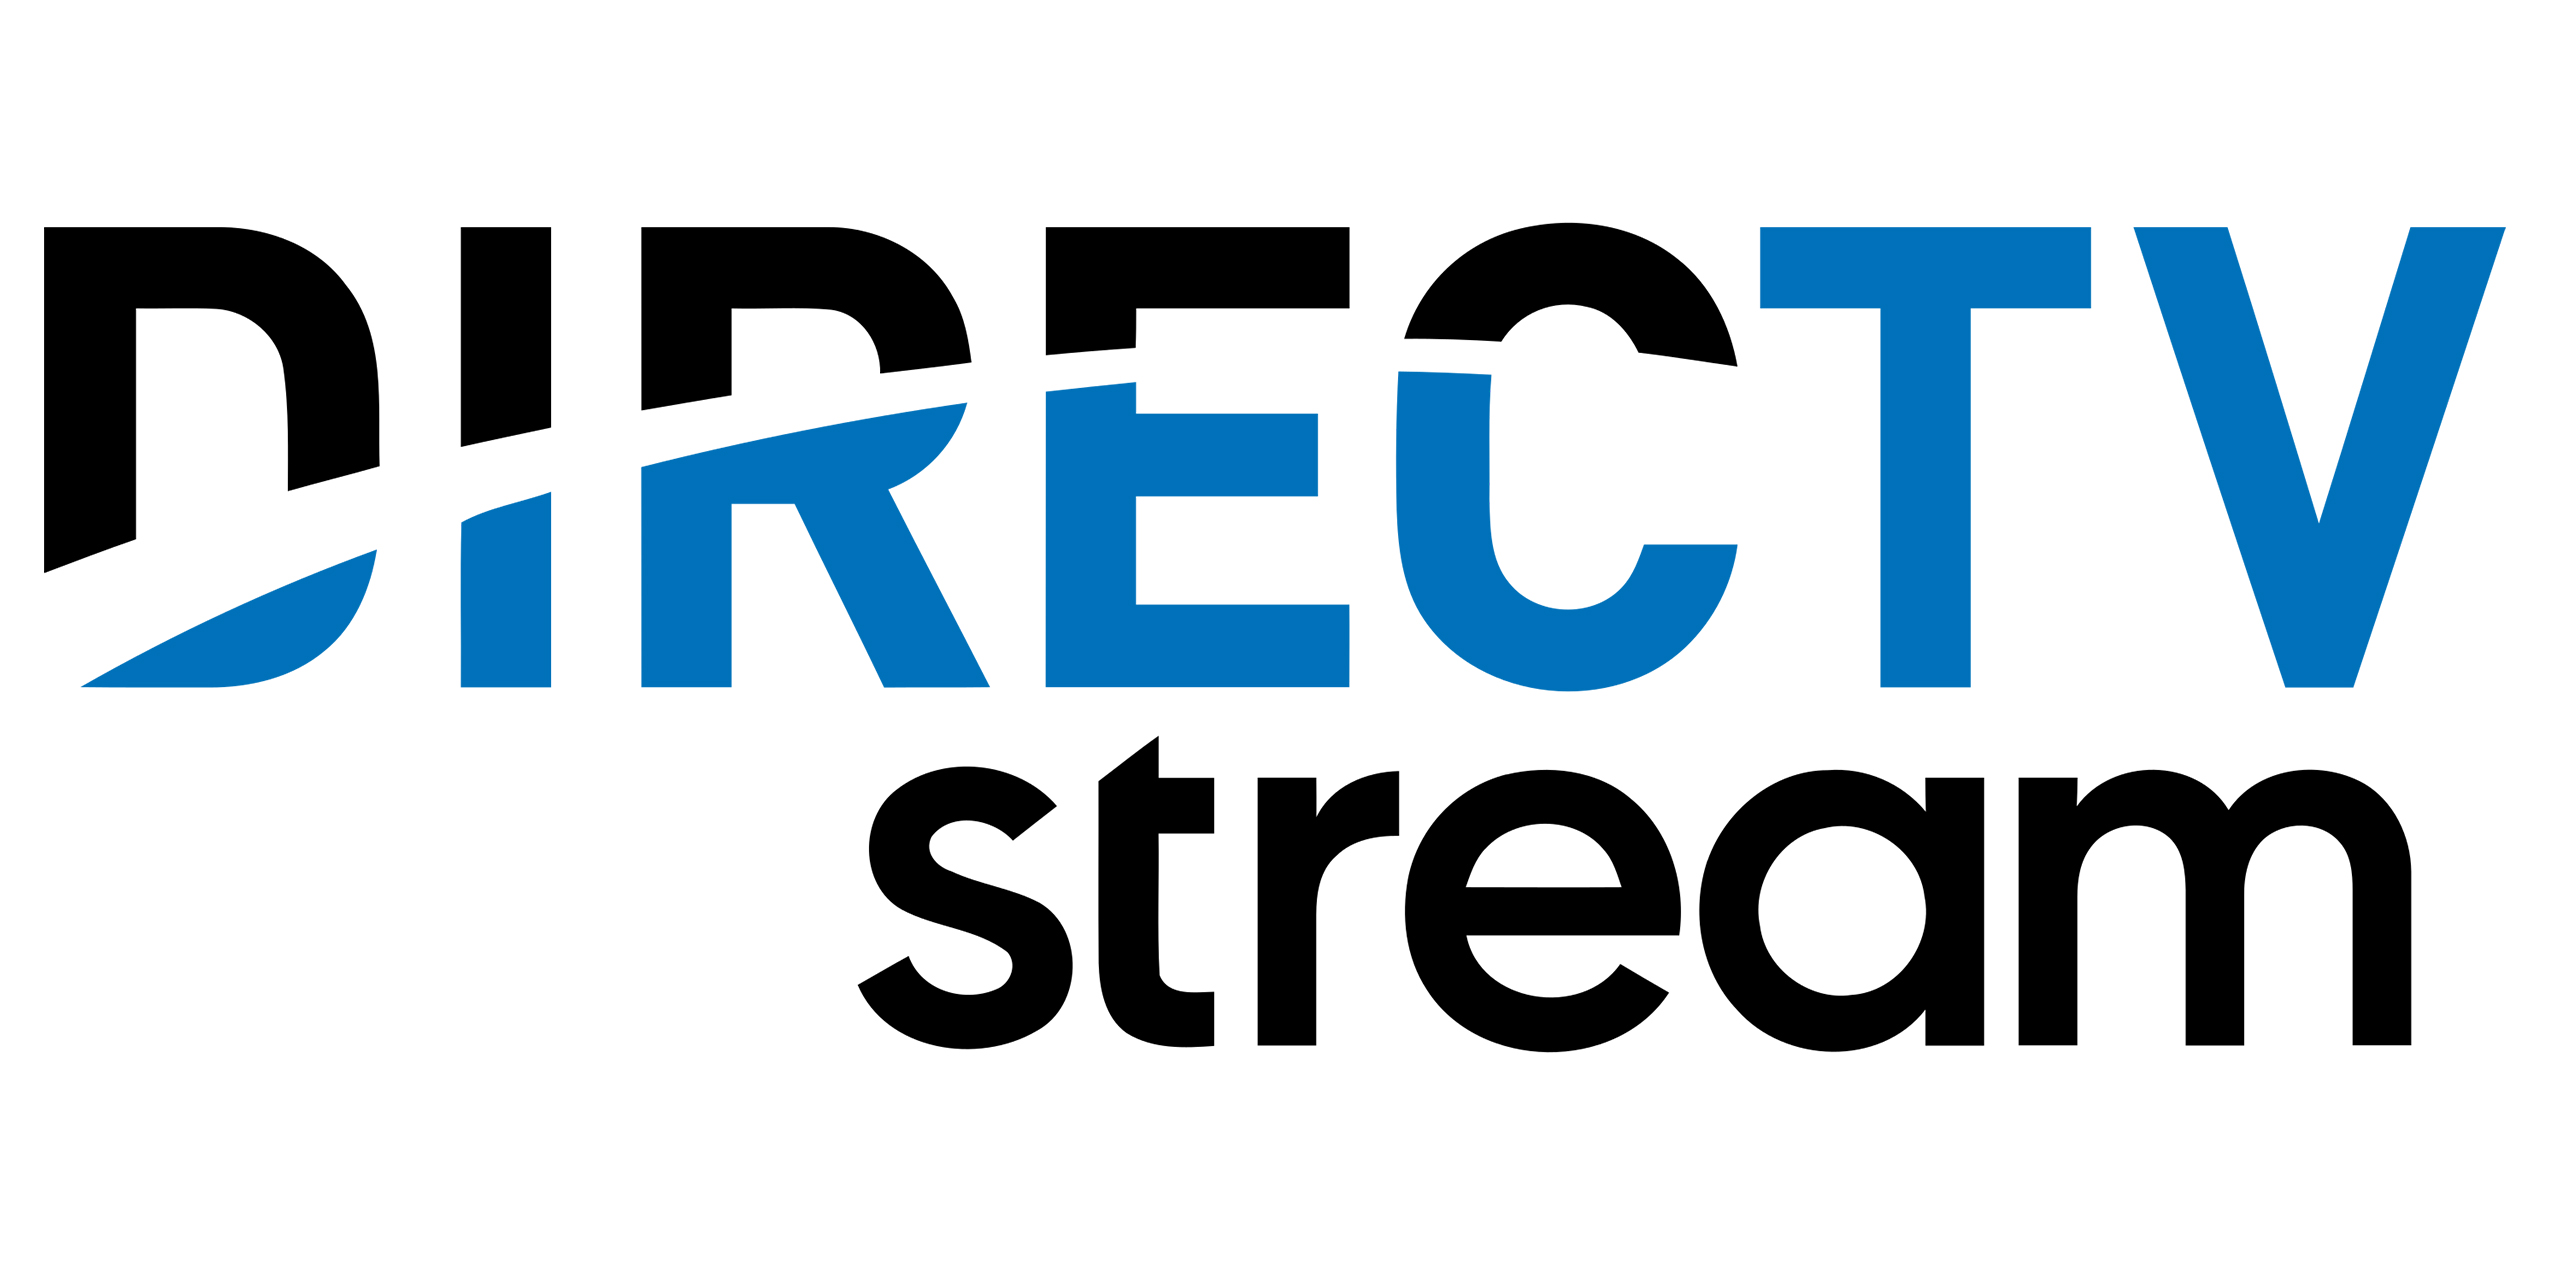 Stream DirecTV Now Cost, Channels, Packages, and How to Sign Up